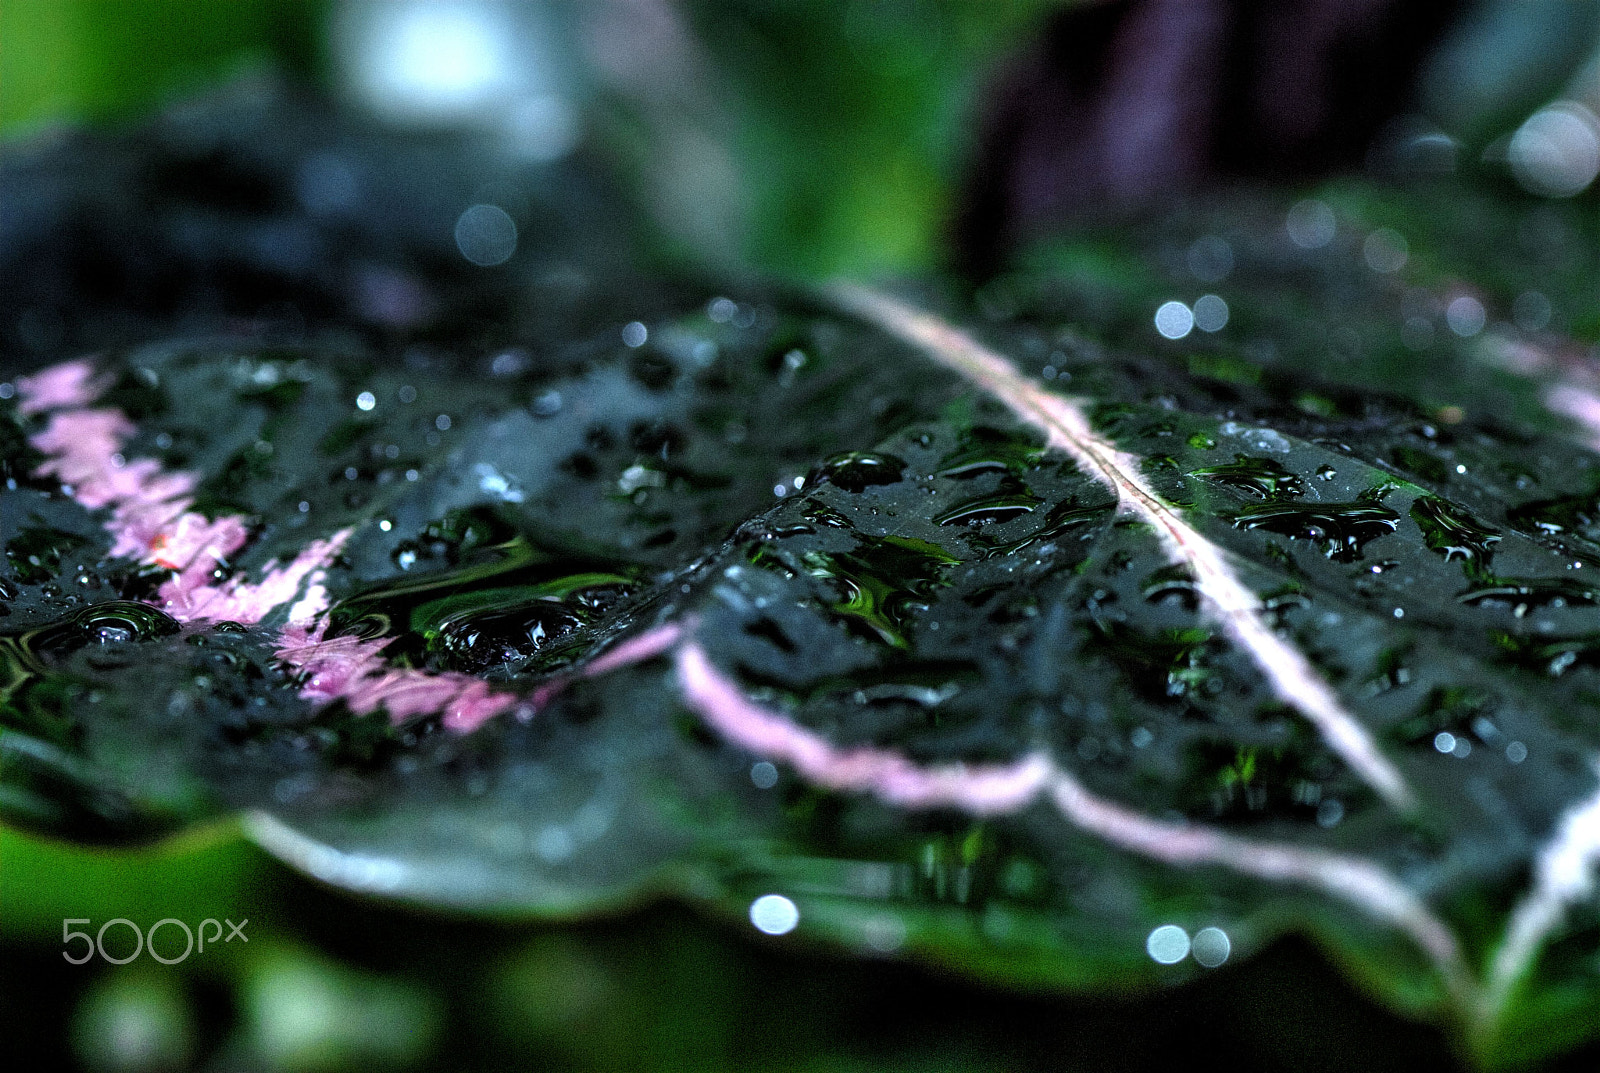 Nikon D200 + Nikon AF-S Micro-Nikkor 105mm F2.8G IF-ED VR sample photo. Foliage plants and water droplets photography